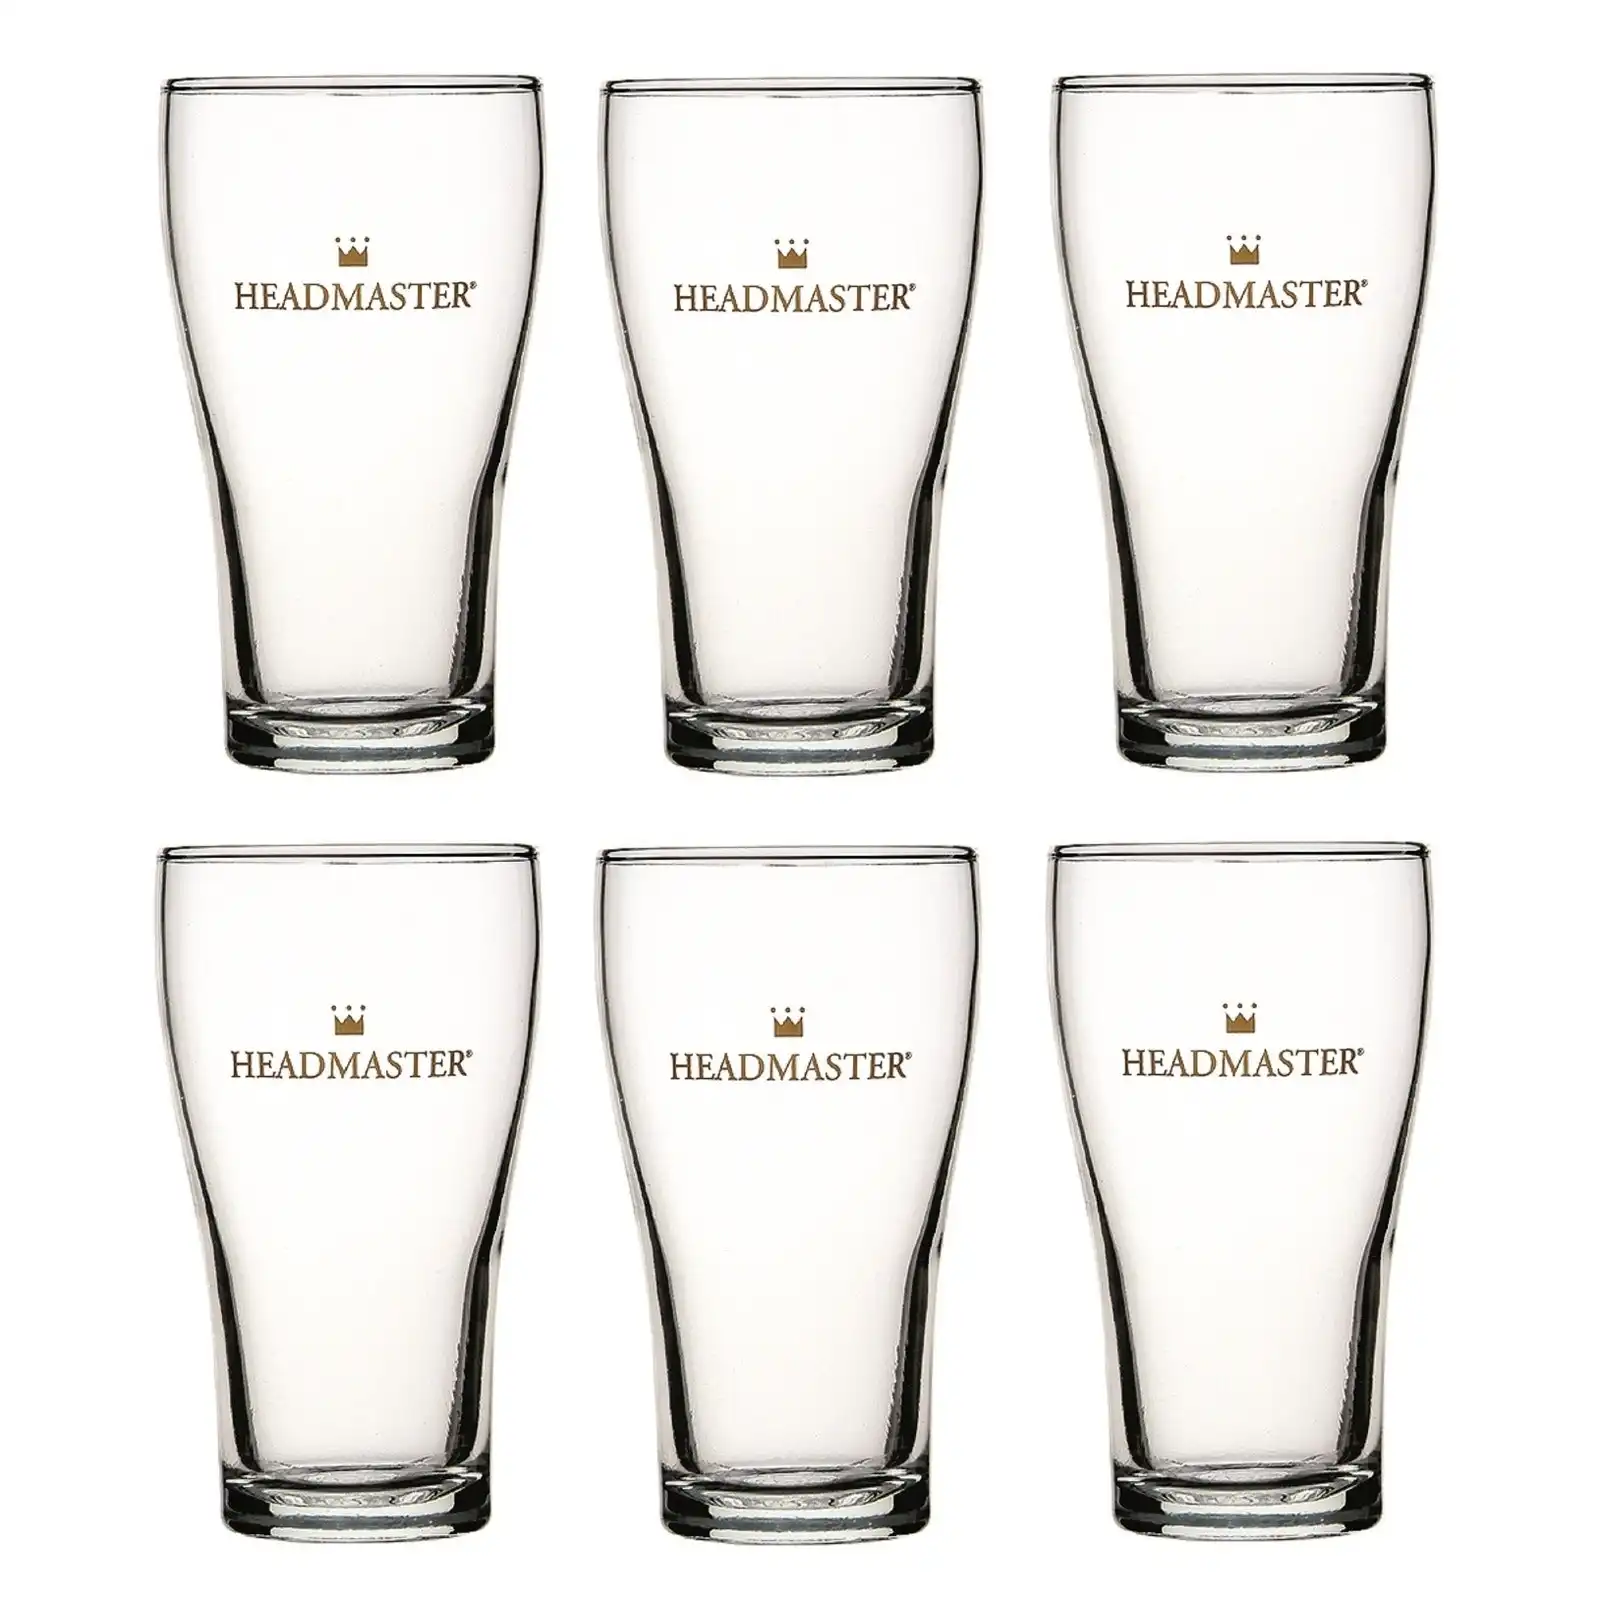 CROWN NUCLEATED Headmaster BEER CONICAL GLASSES 285ml - Set of 48